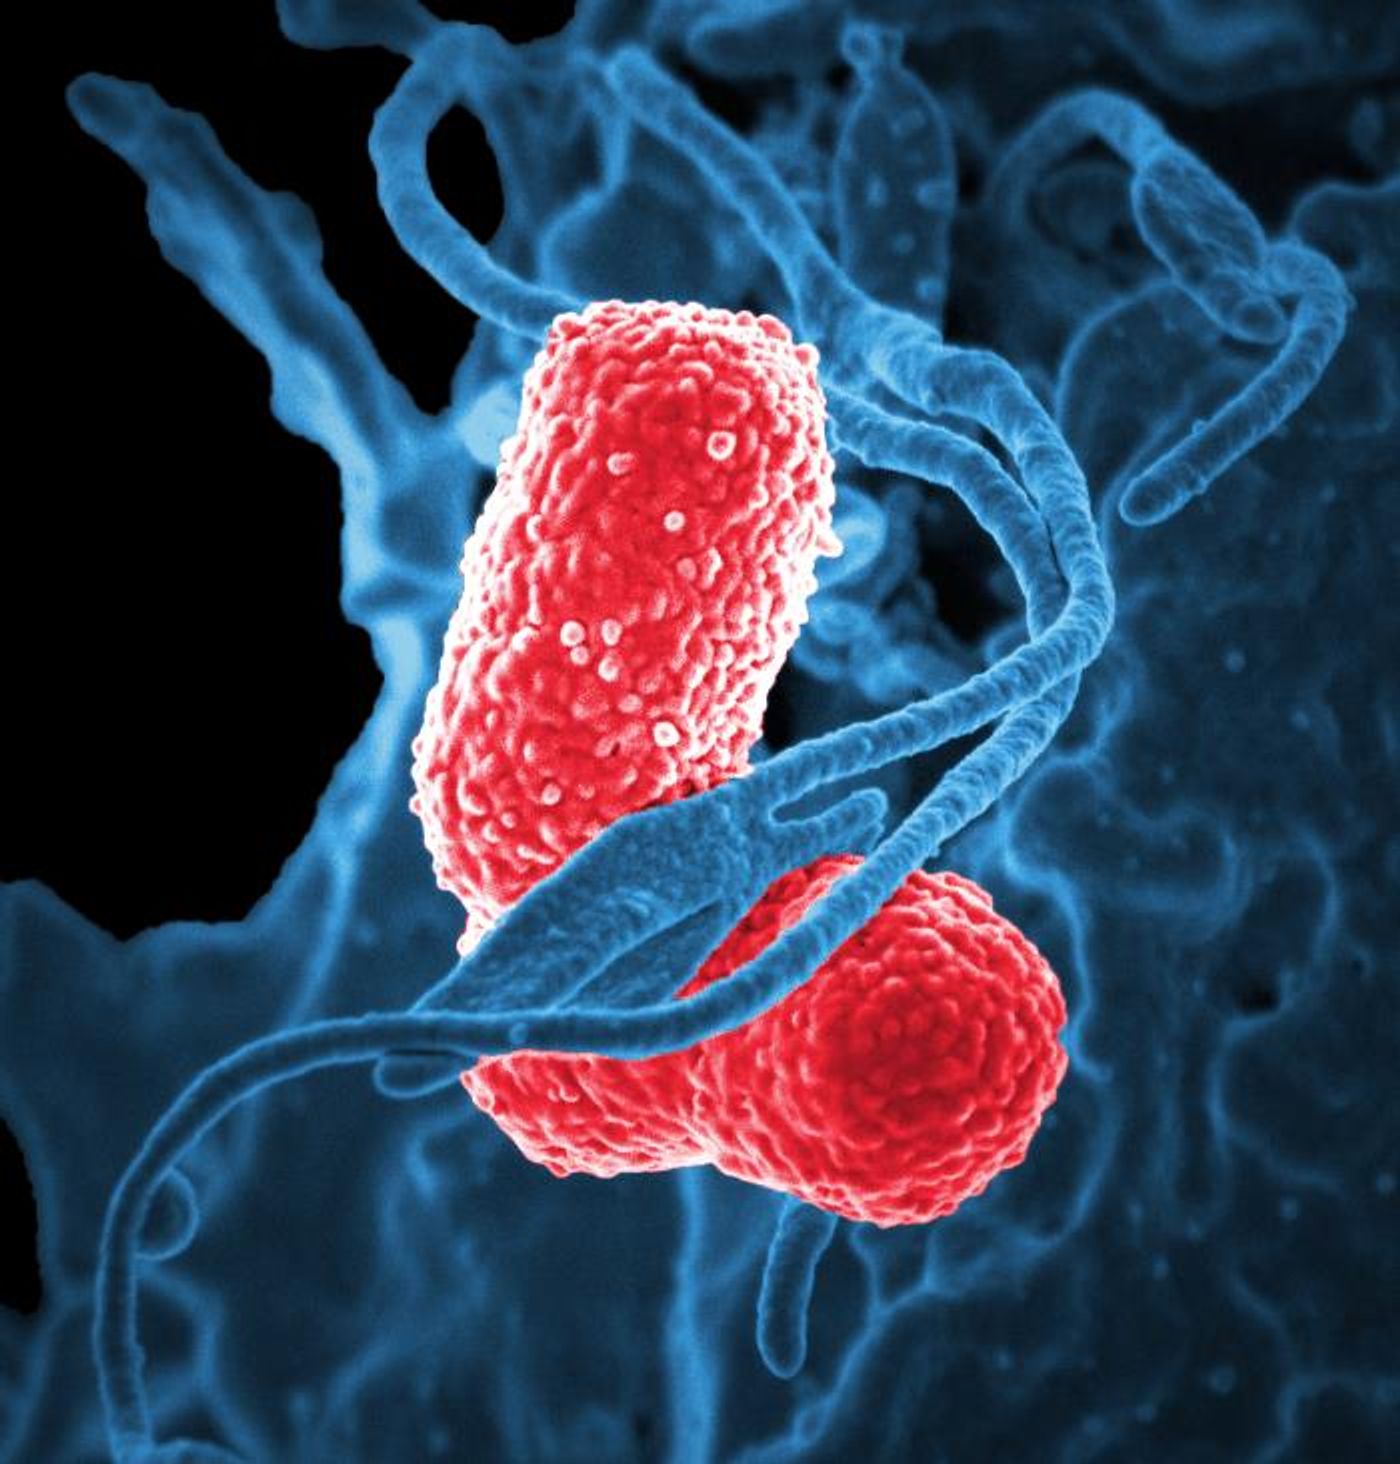 An SEM image of a human neutrophil (blue) interacting with two multidrug-resistant (MDR), Klebsiella pneumoniae bacteria (pink), which are known to cause severe hospital acquired, nosocomial infections. / Credit: National Institute of Allergy and Infectious Diseases (NIAID) / David Dorward; Ph.D.; NIAID